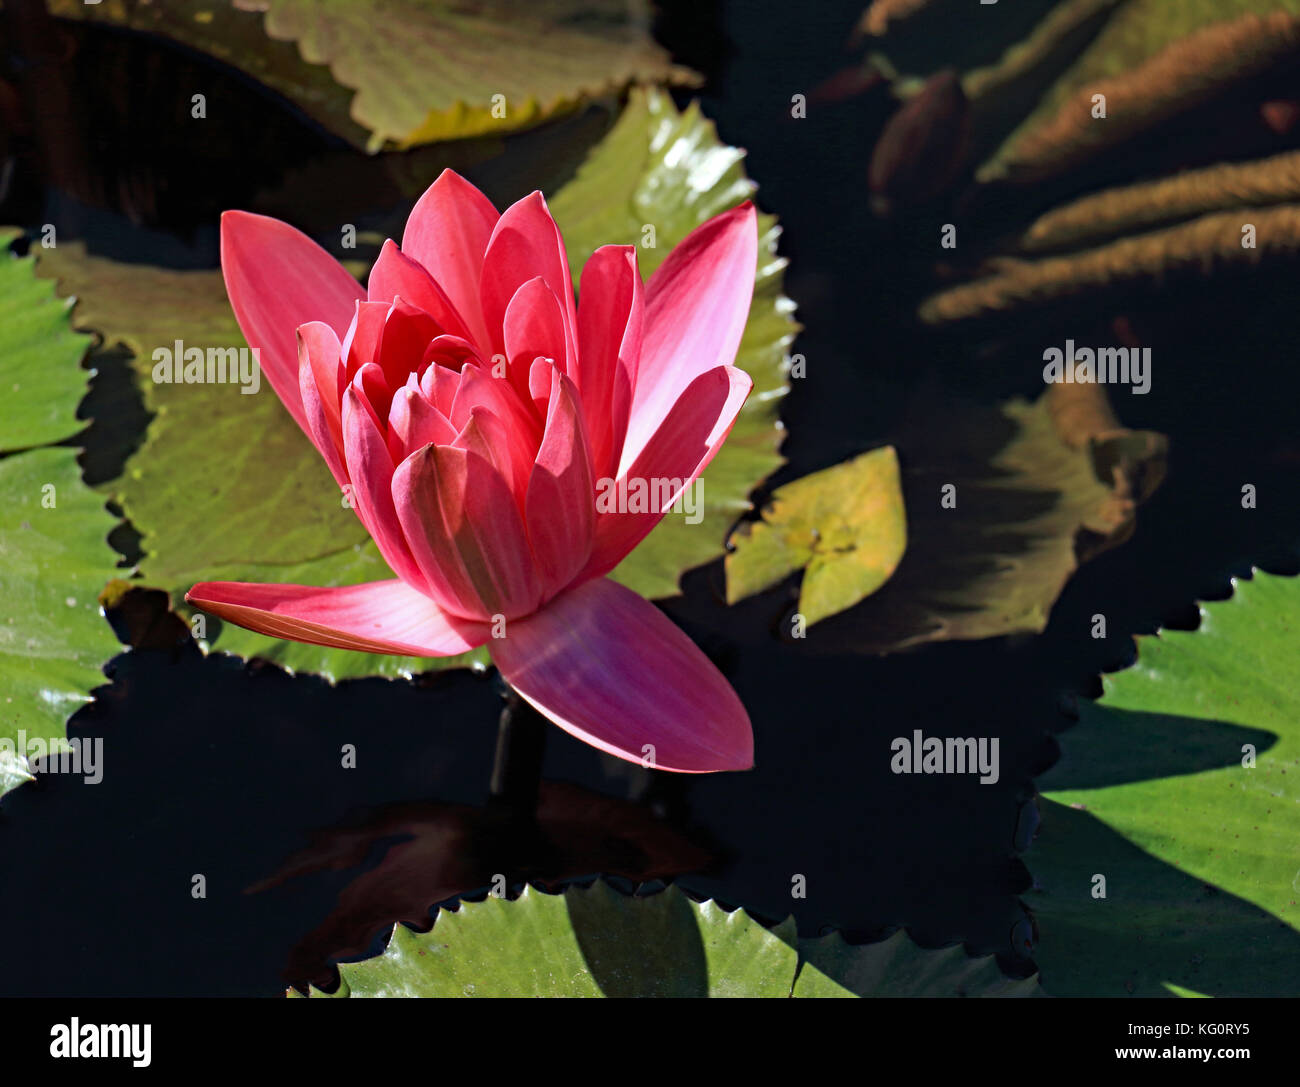 this single deep-pink water lily blossom emerges from this lily pad covered the water garden Stock Photo